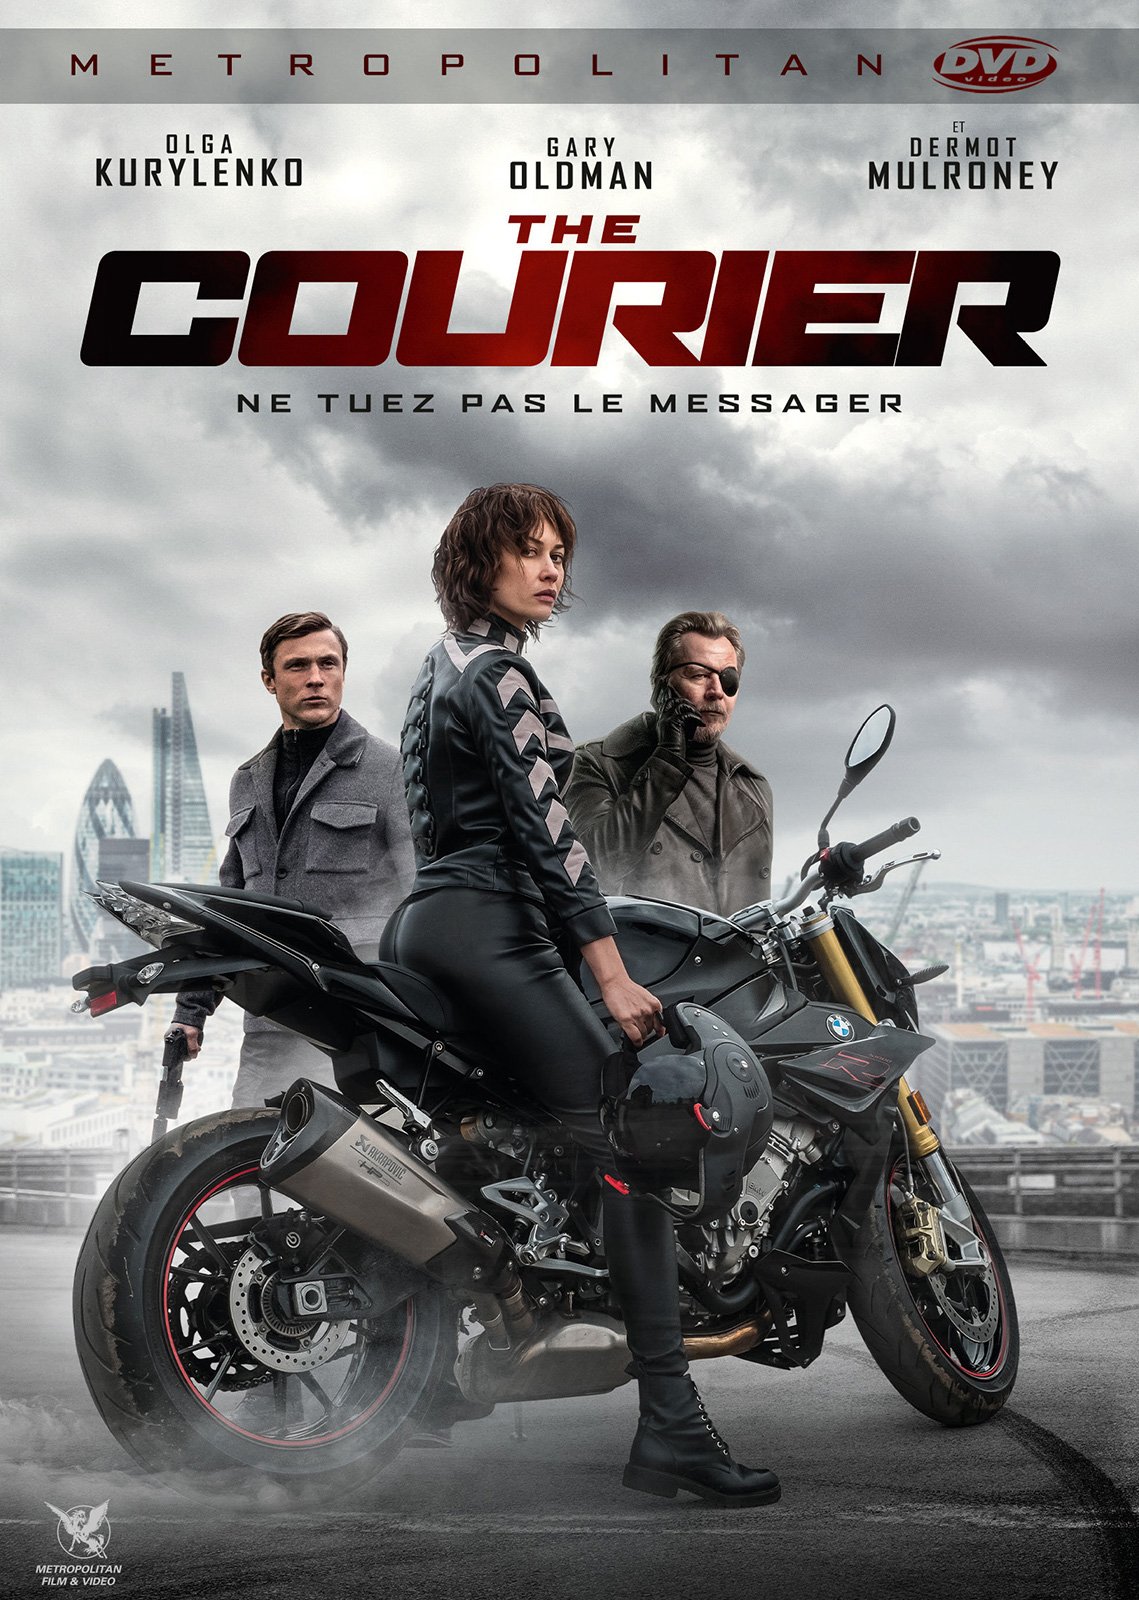 The Courier is a gripping new film based on a real 60s spy